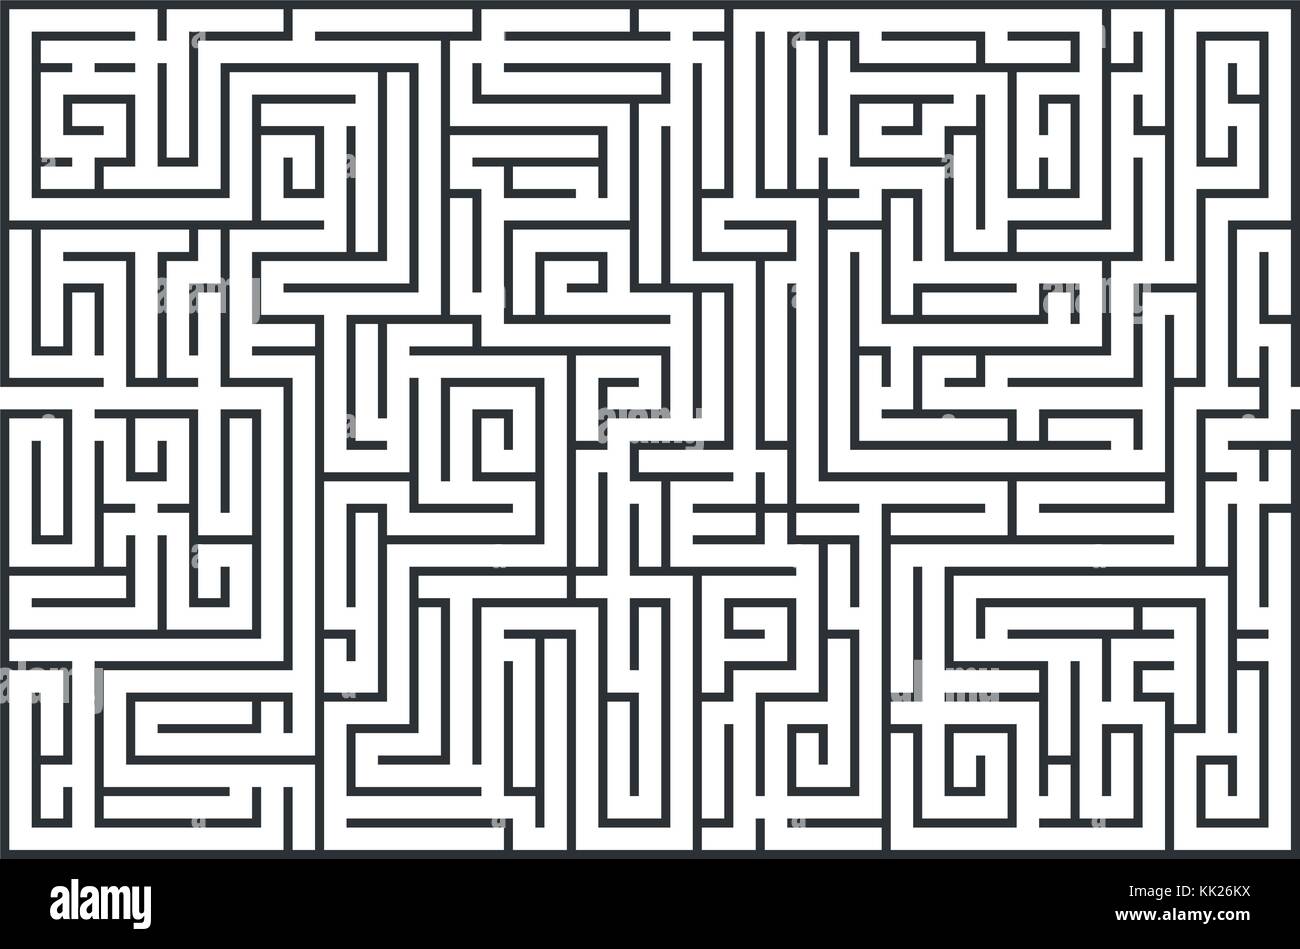 illustration of maze, labrinth. Isolated on white background. Medium difficulty. Stock Vector